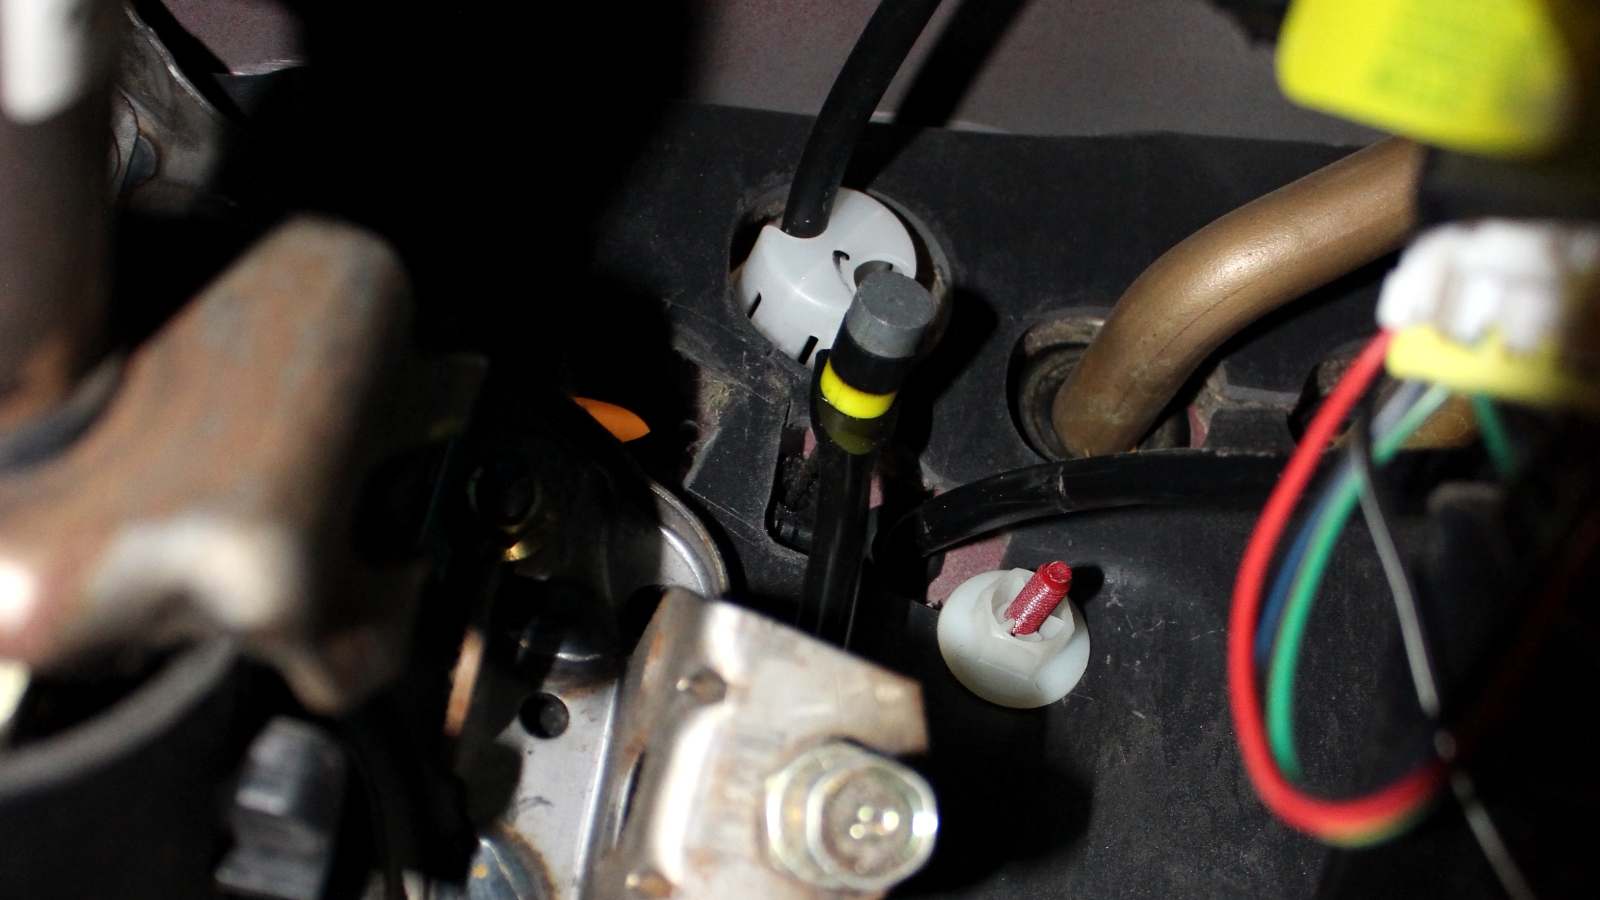 Miata throttle cable connected to gas pedal